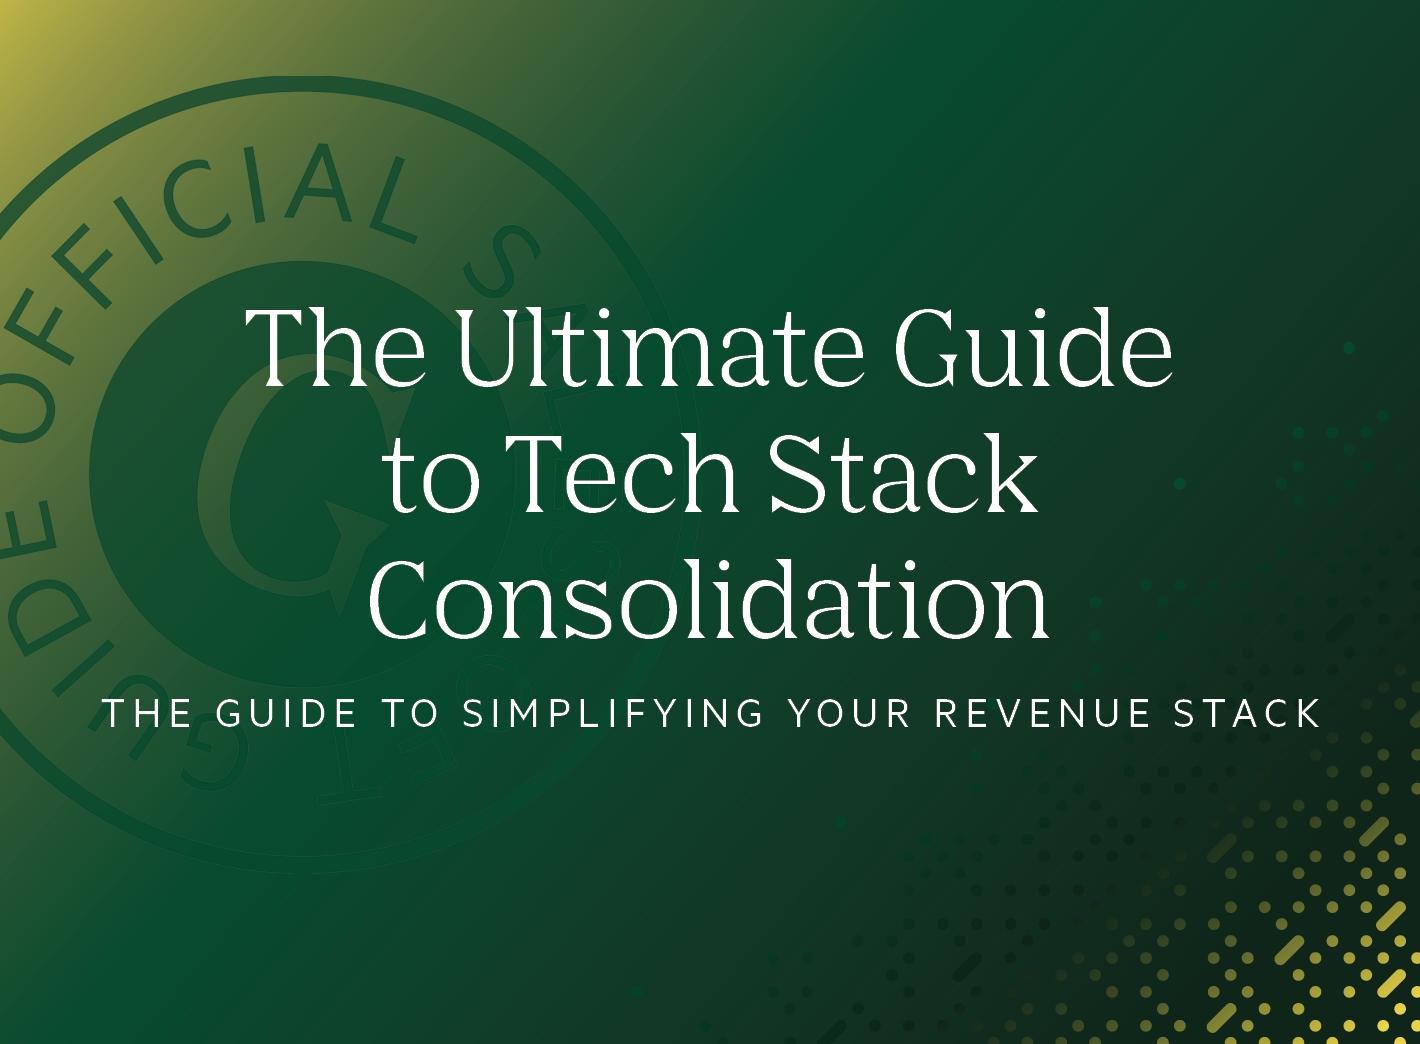 "The ultimate guide to tech stack consolidation"